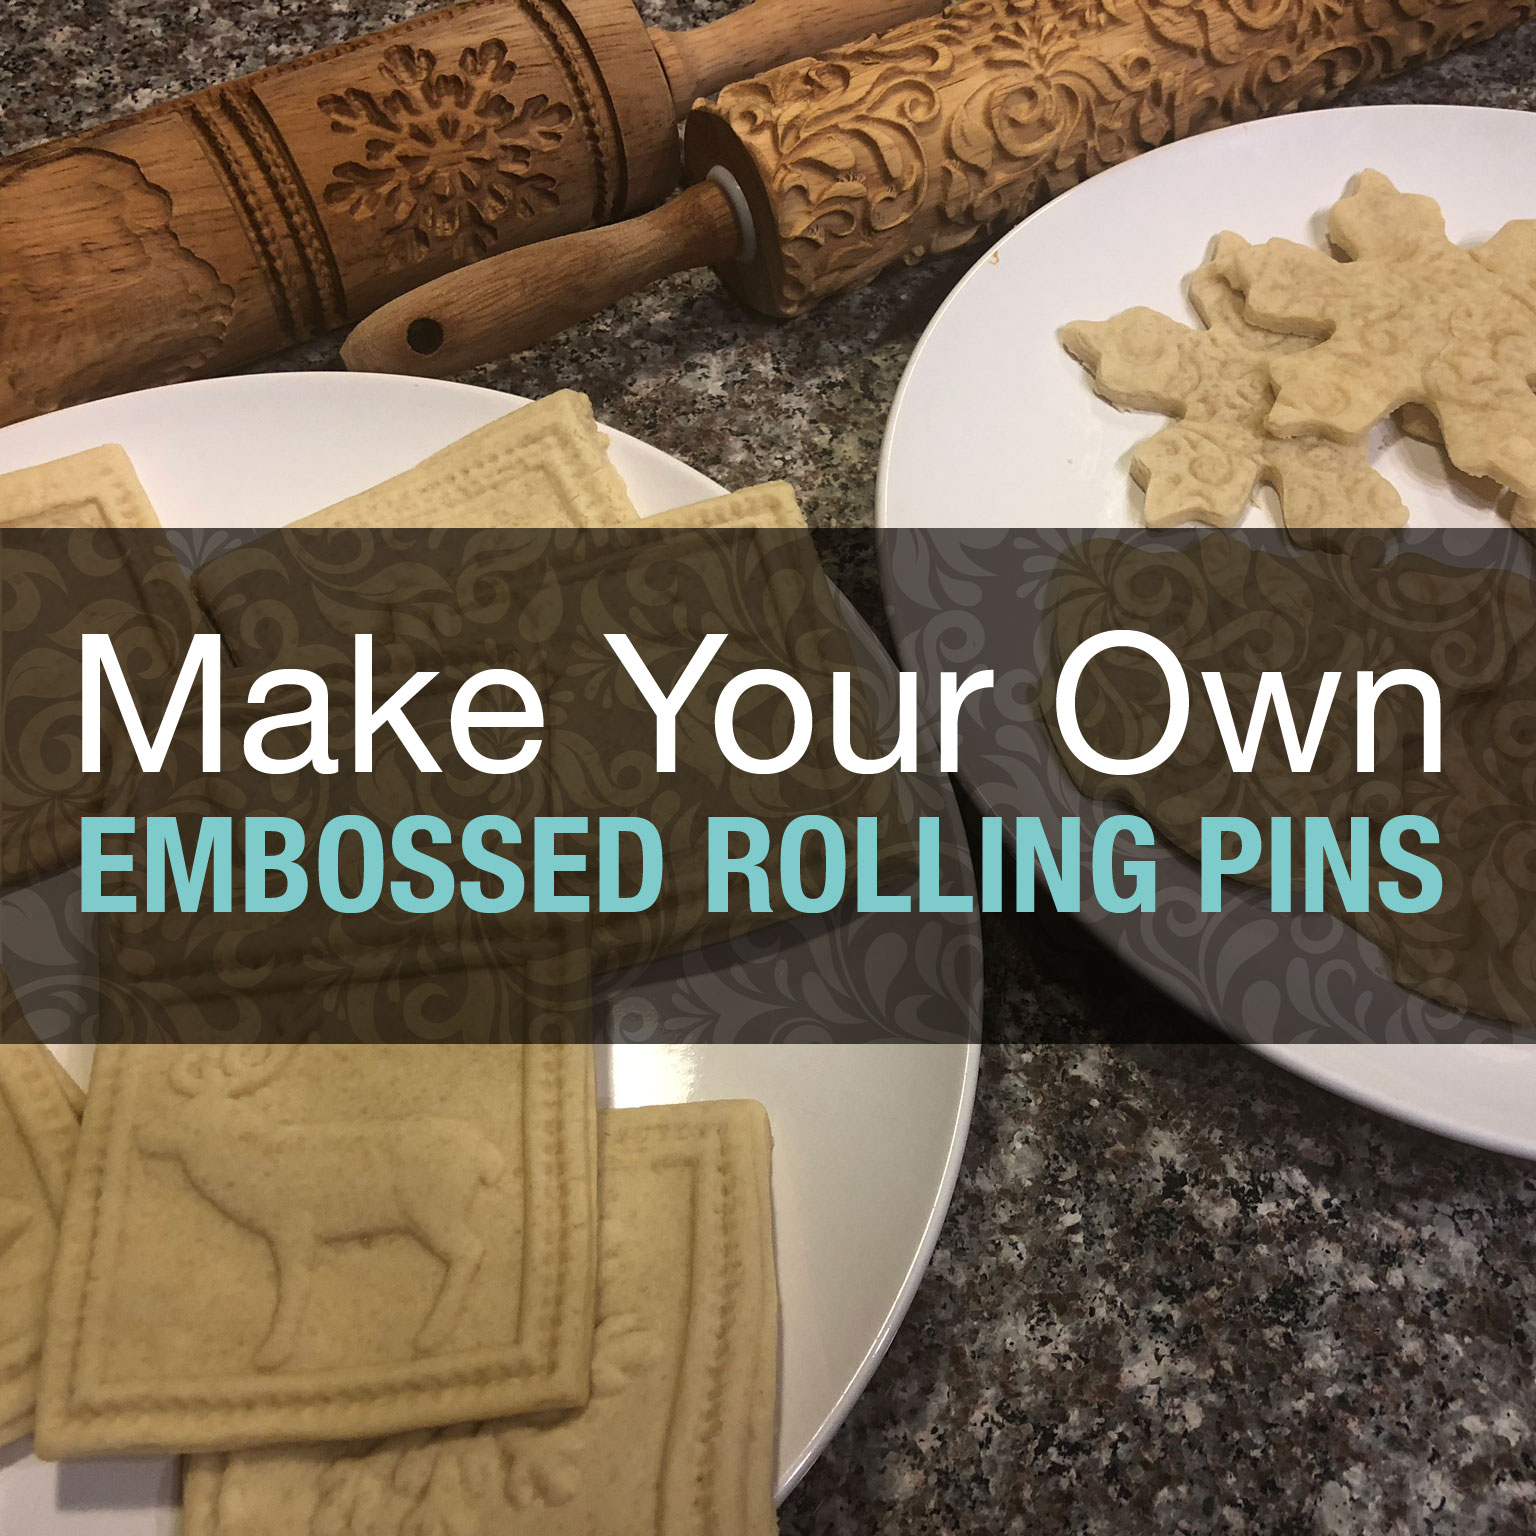 Make Your Own Embossed Rolling Pins   CarveWright